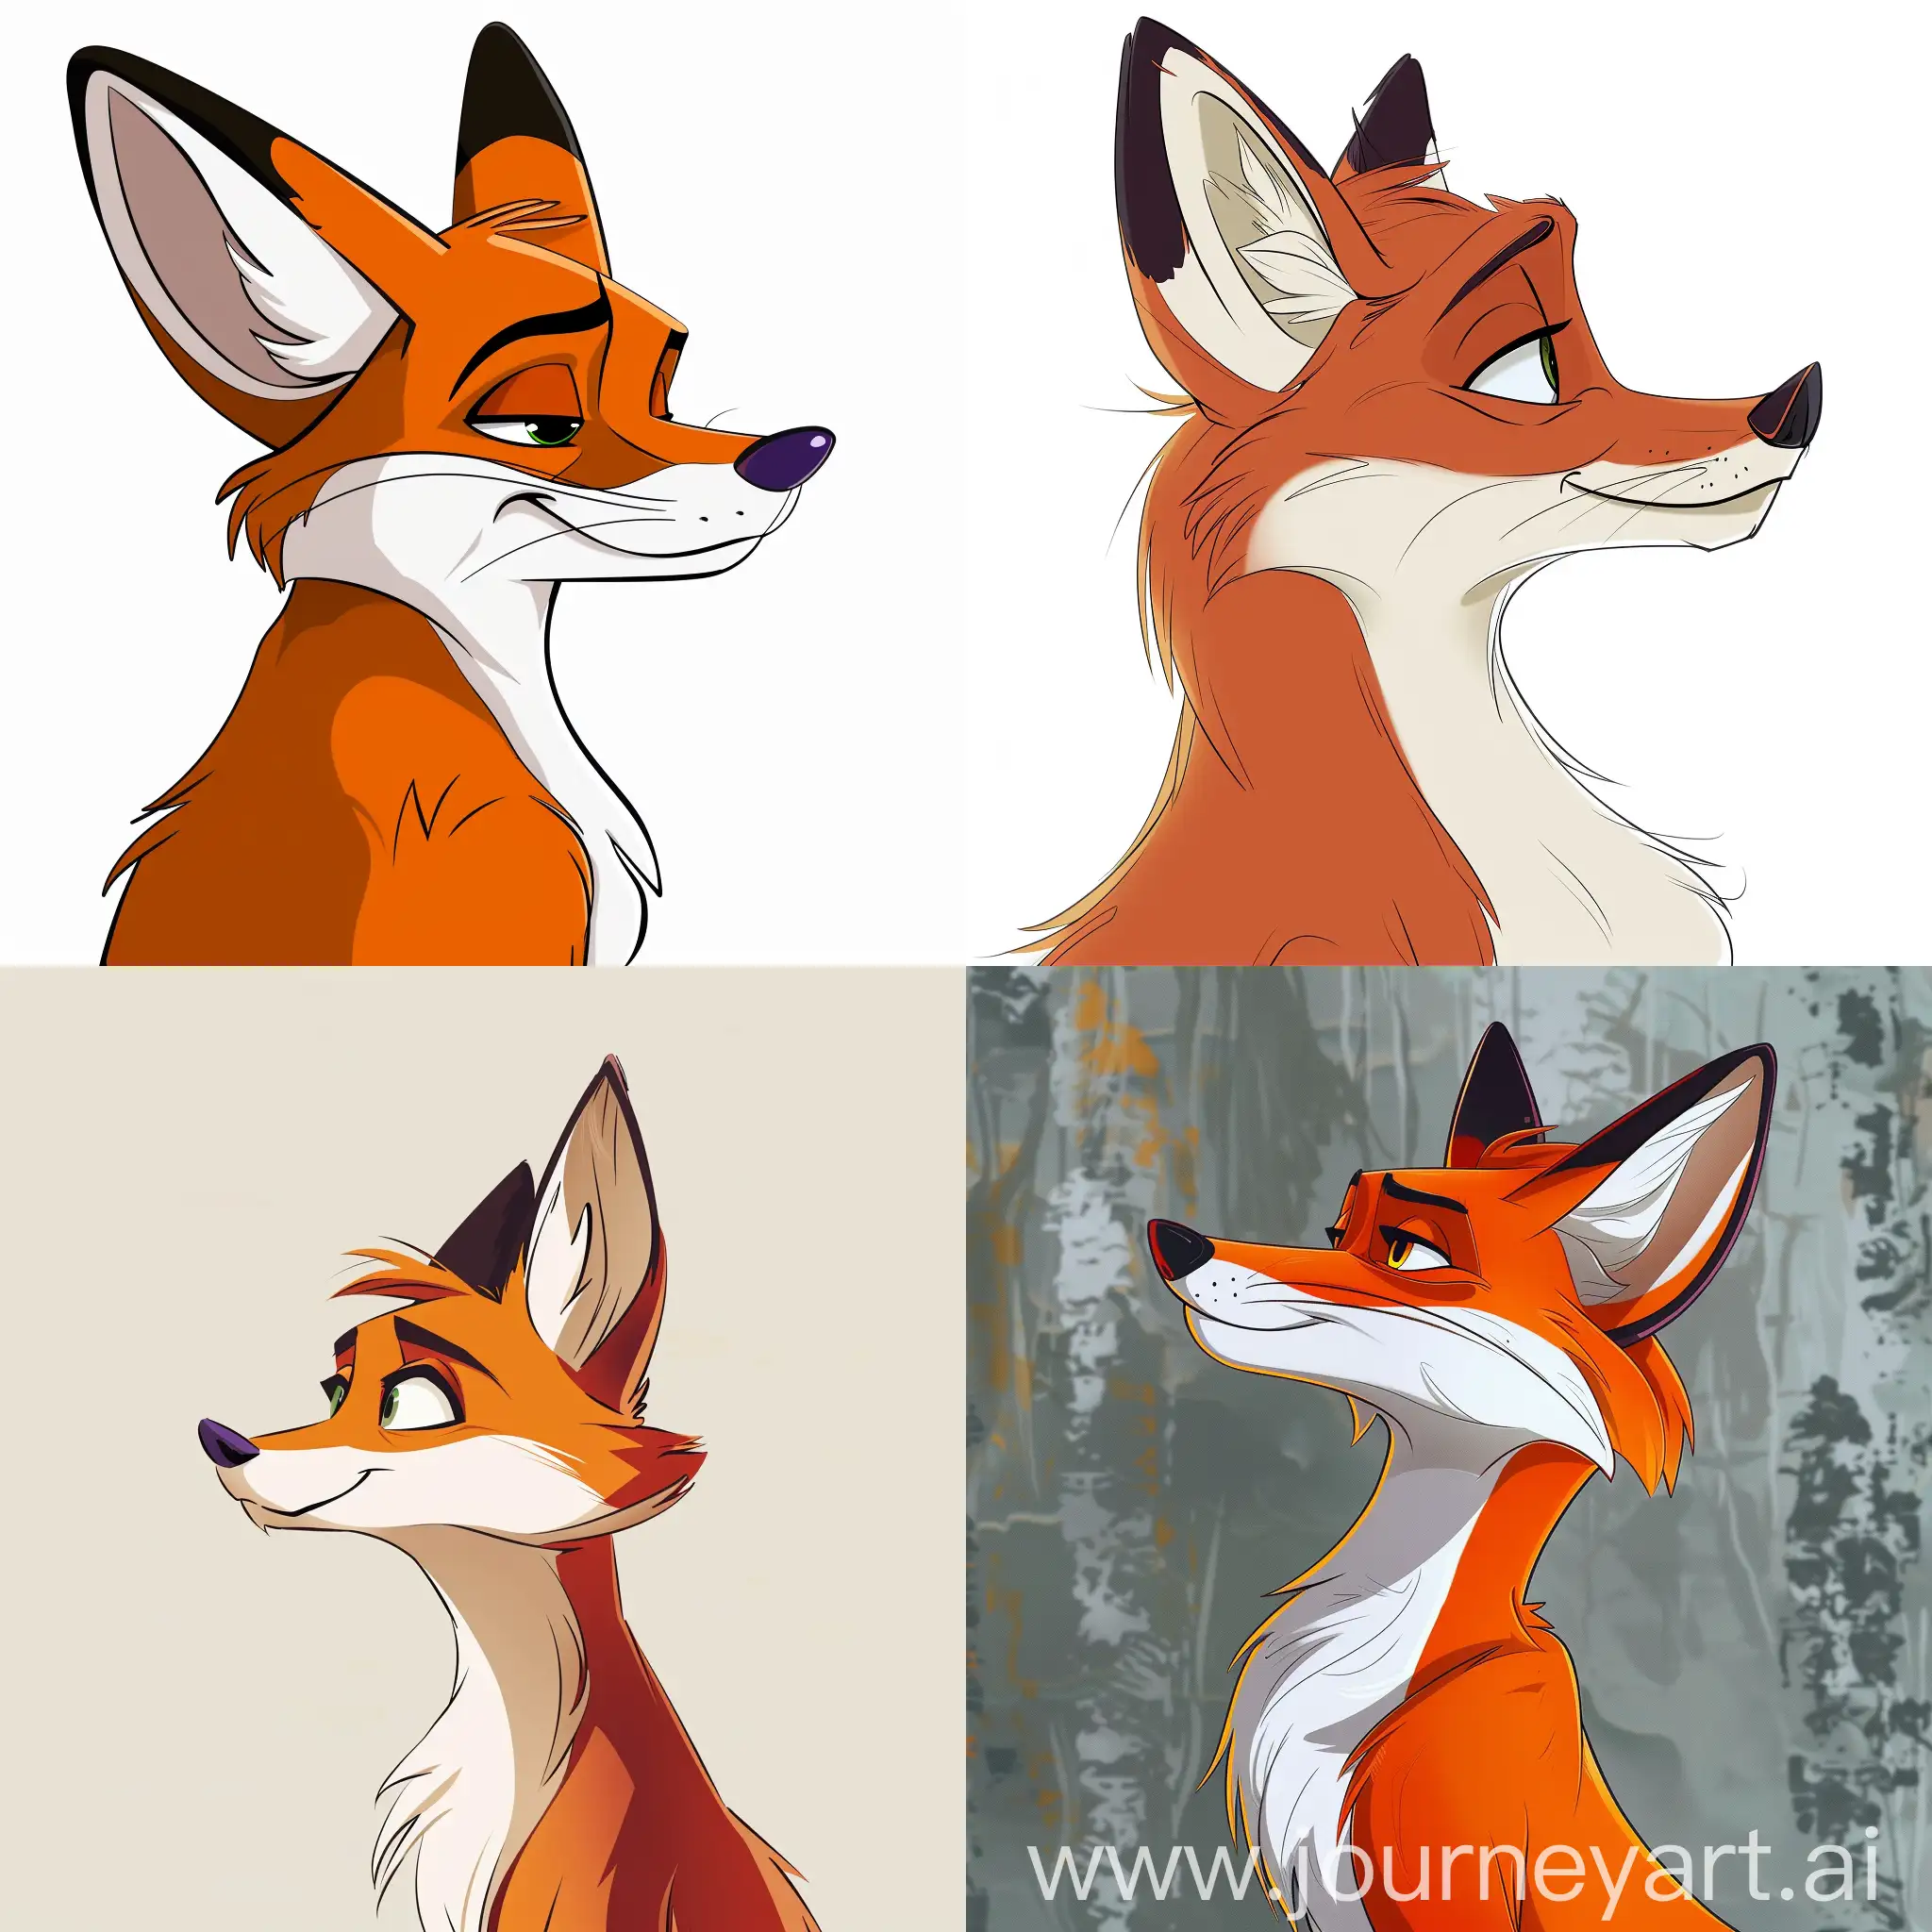 Adorable-Cartoon-Fox-with-Drooping-Ears-Vibrant-Profile-Image